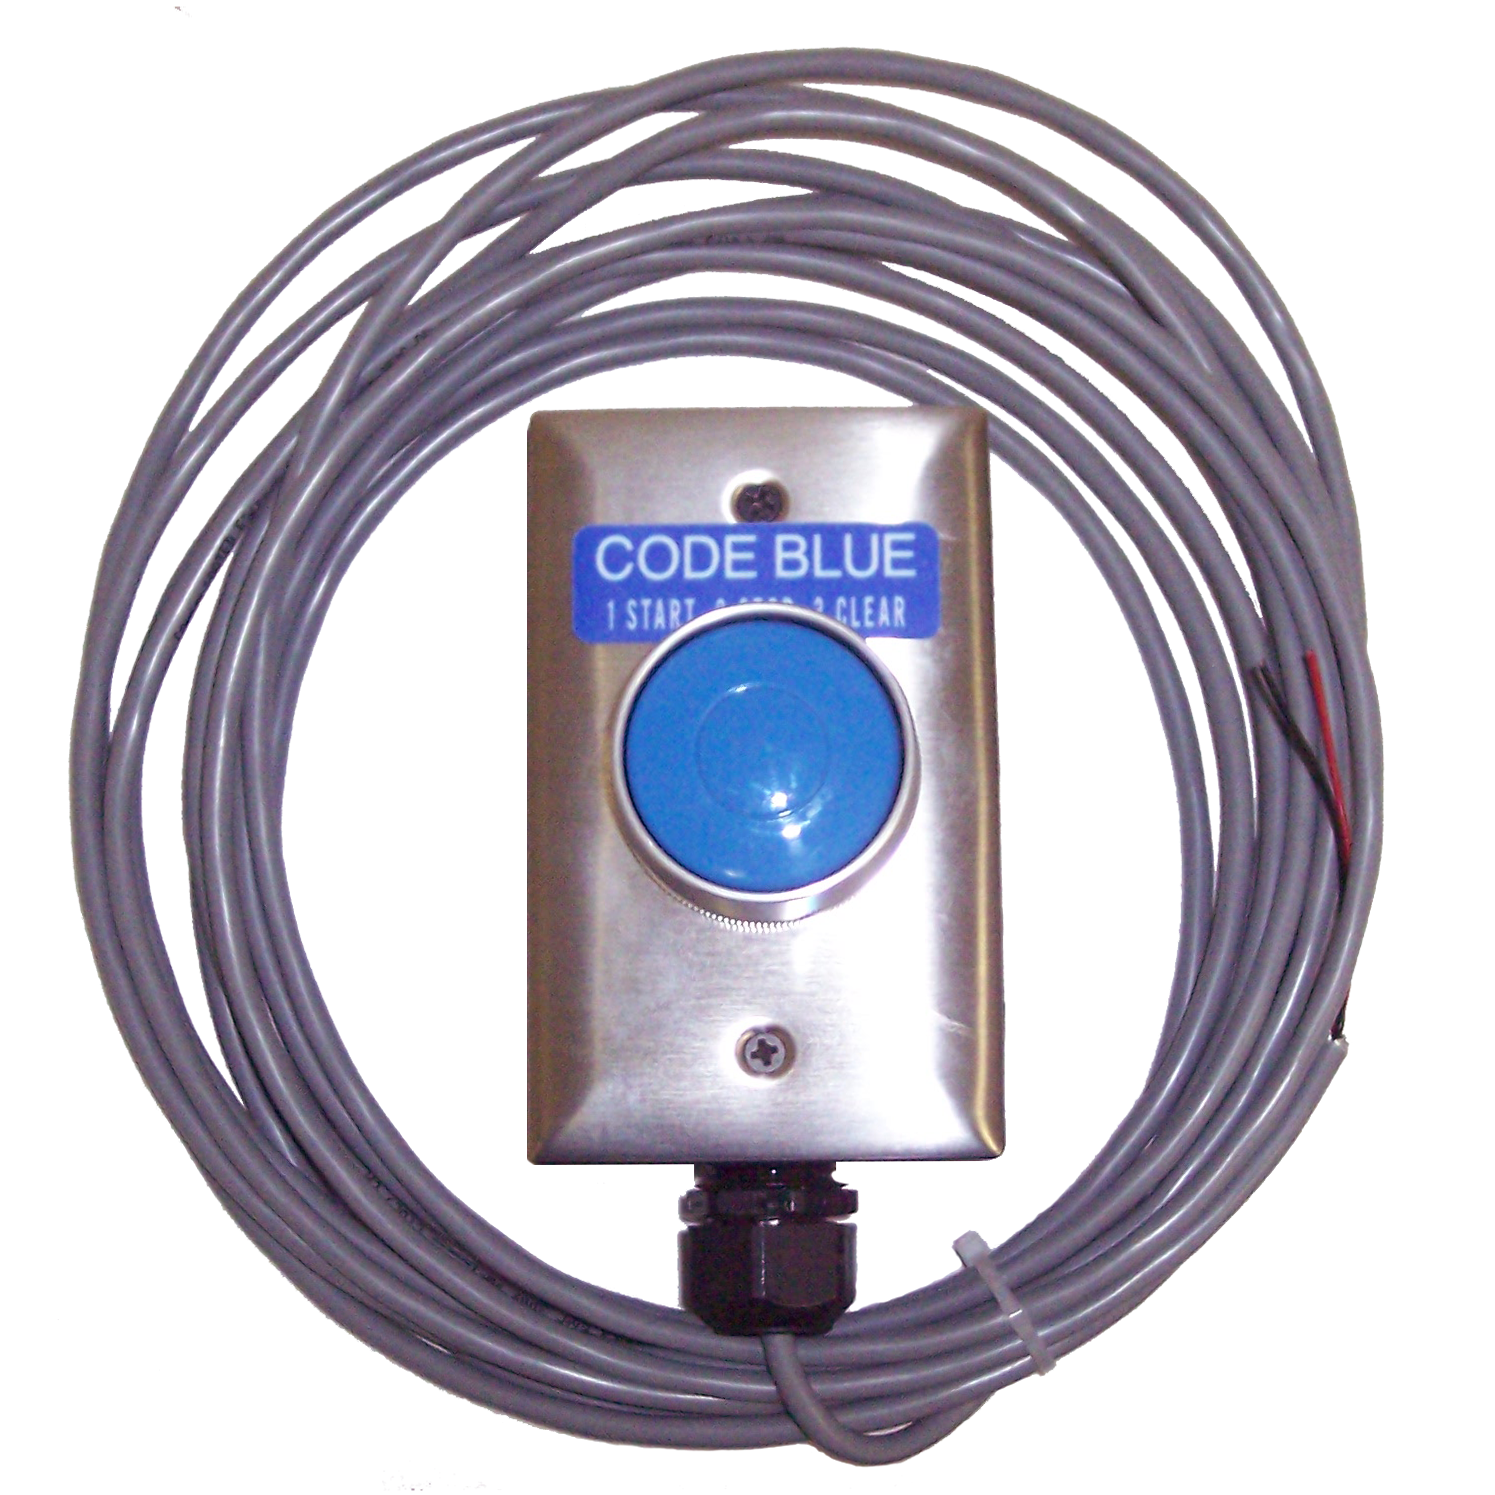 (SW-1-CODE-BLUE-25) 1 Heavy Duty Momentary Actuation 40mm Shrouded Code  Blue Palm Switch mounted in a Stainless Steel Plate and Junction Box with 